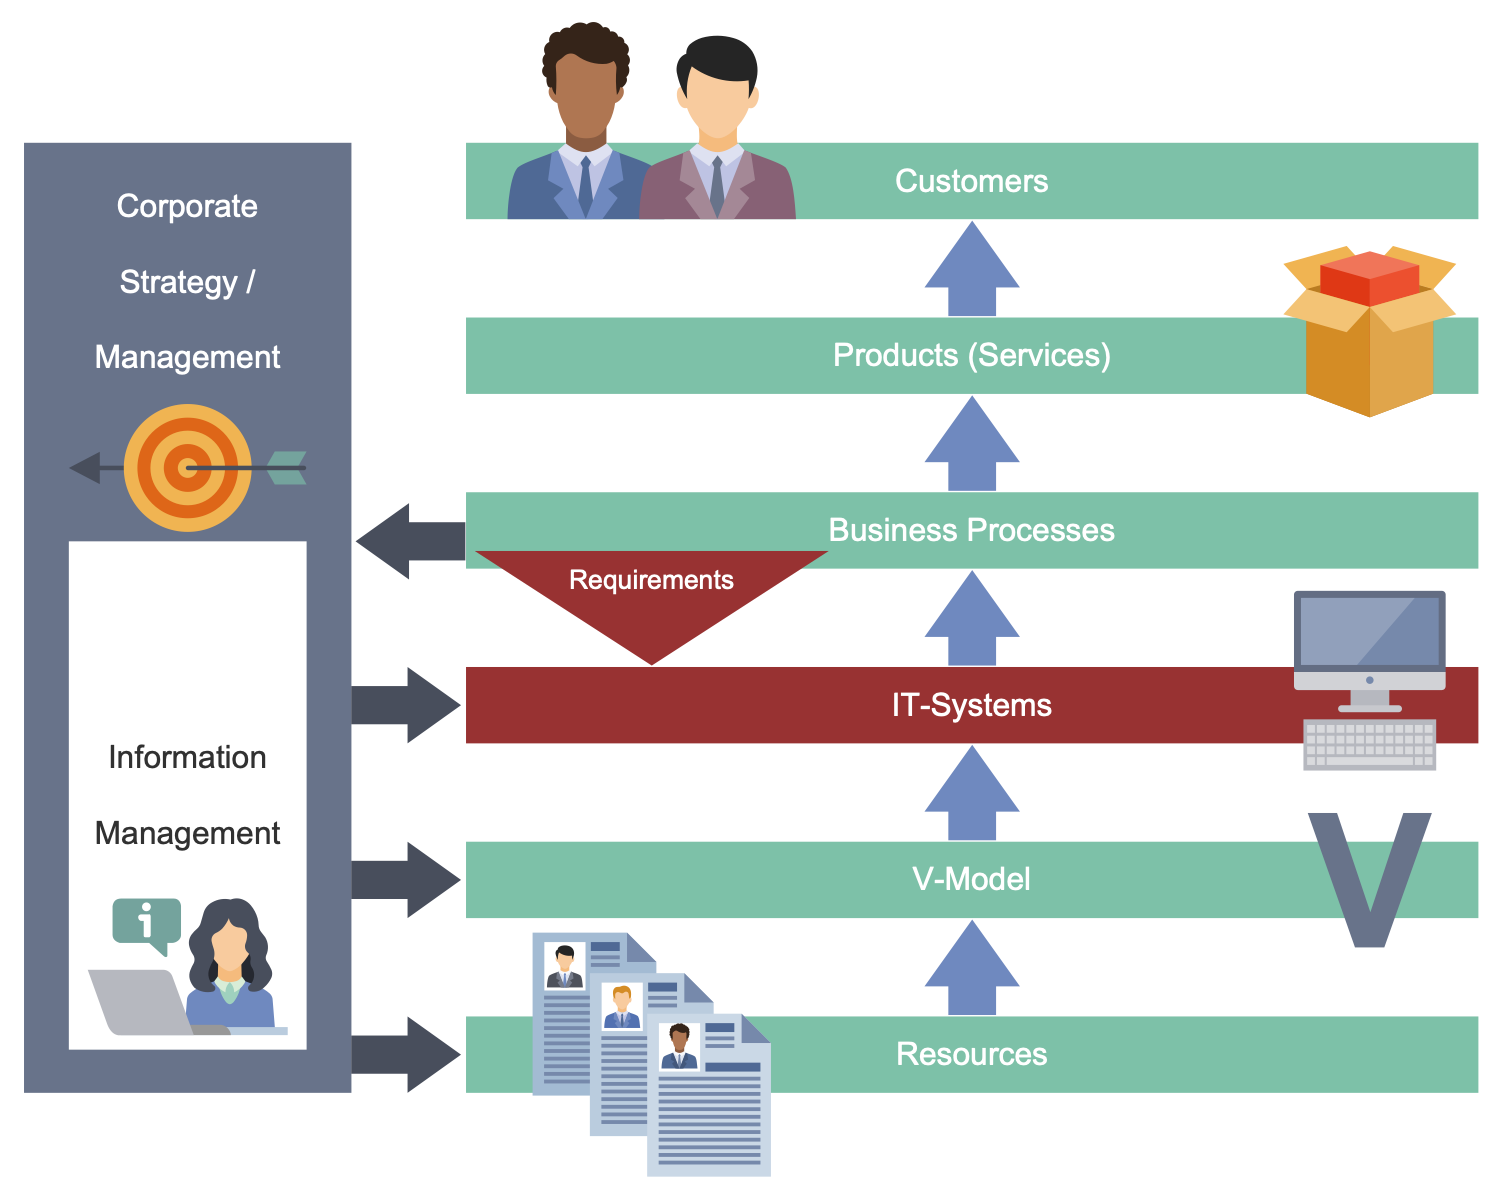 Business Process Workflow Diagram - Business Processes and IT Systems